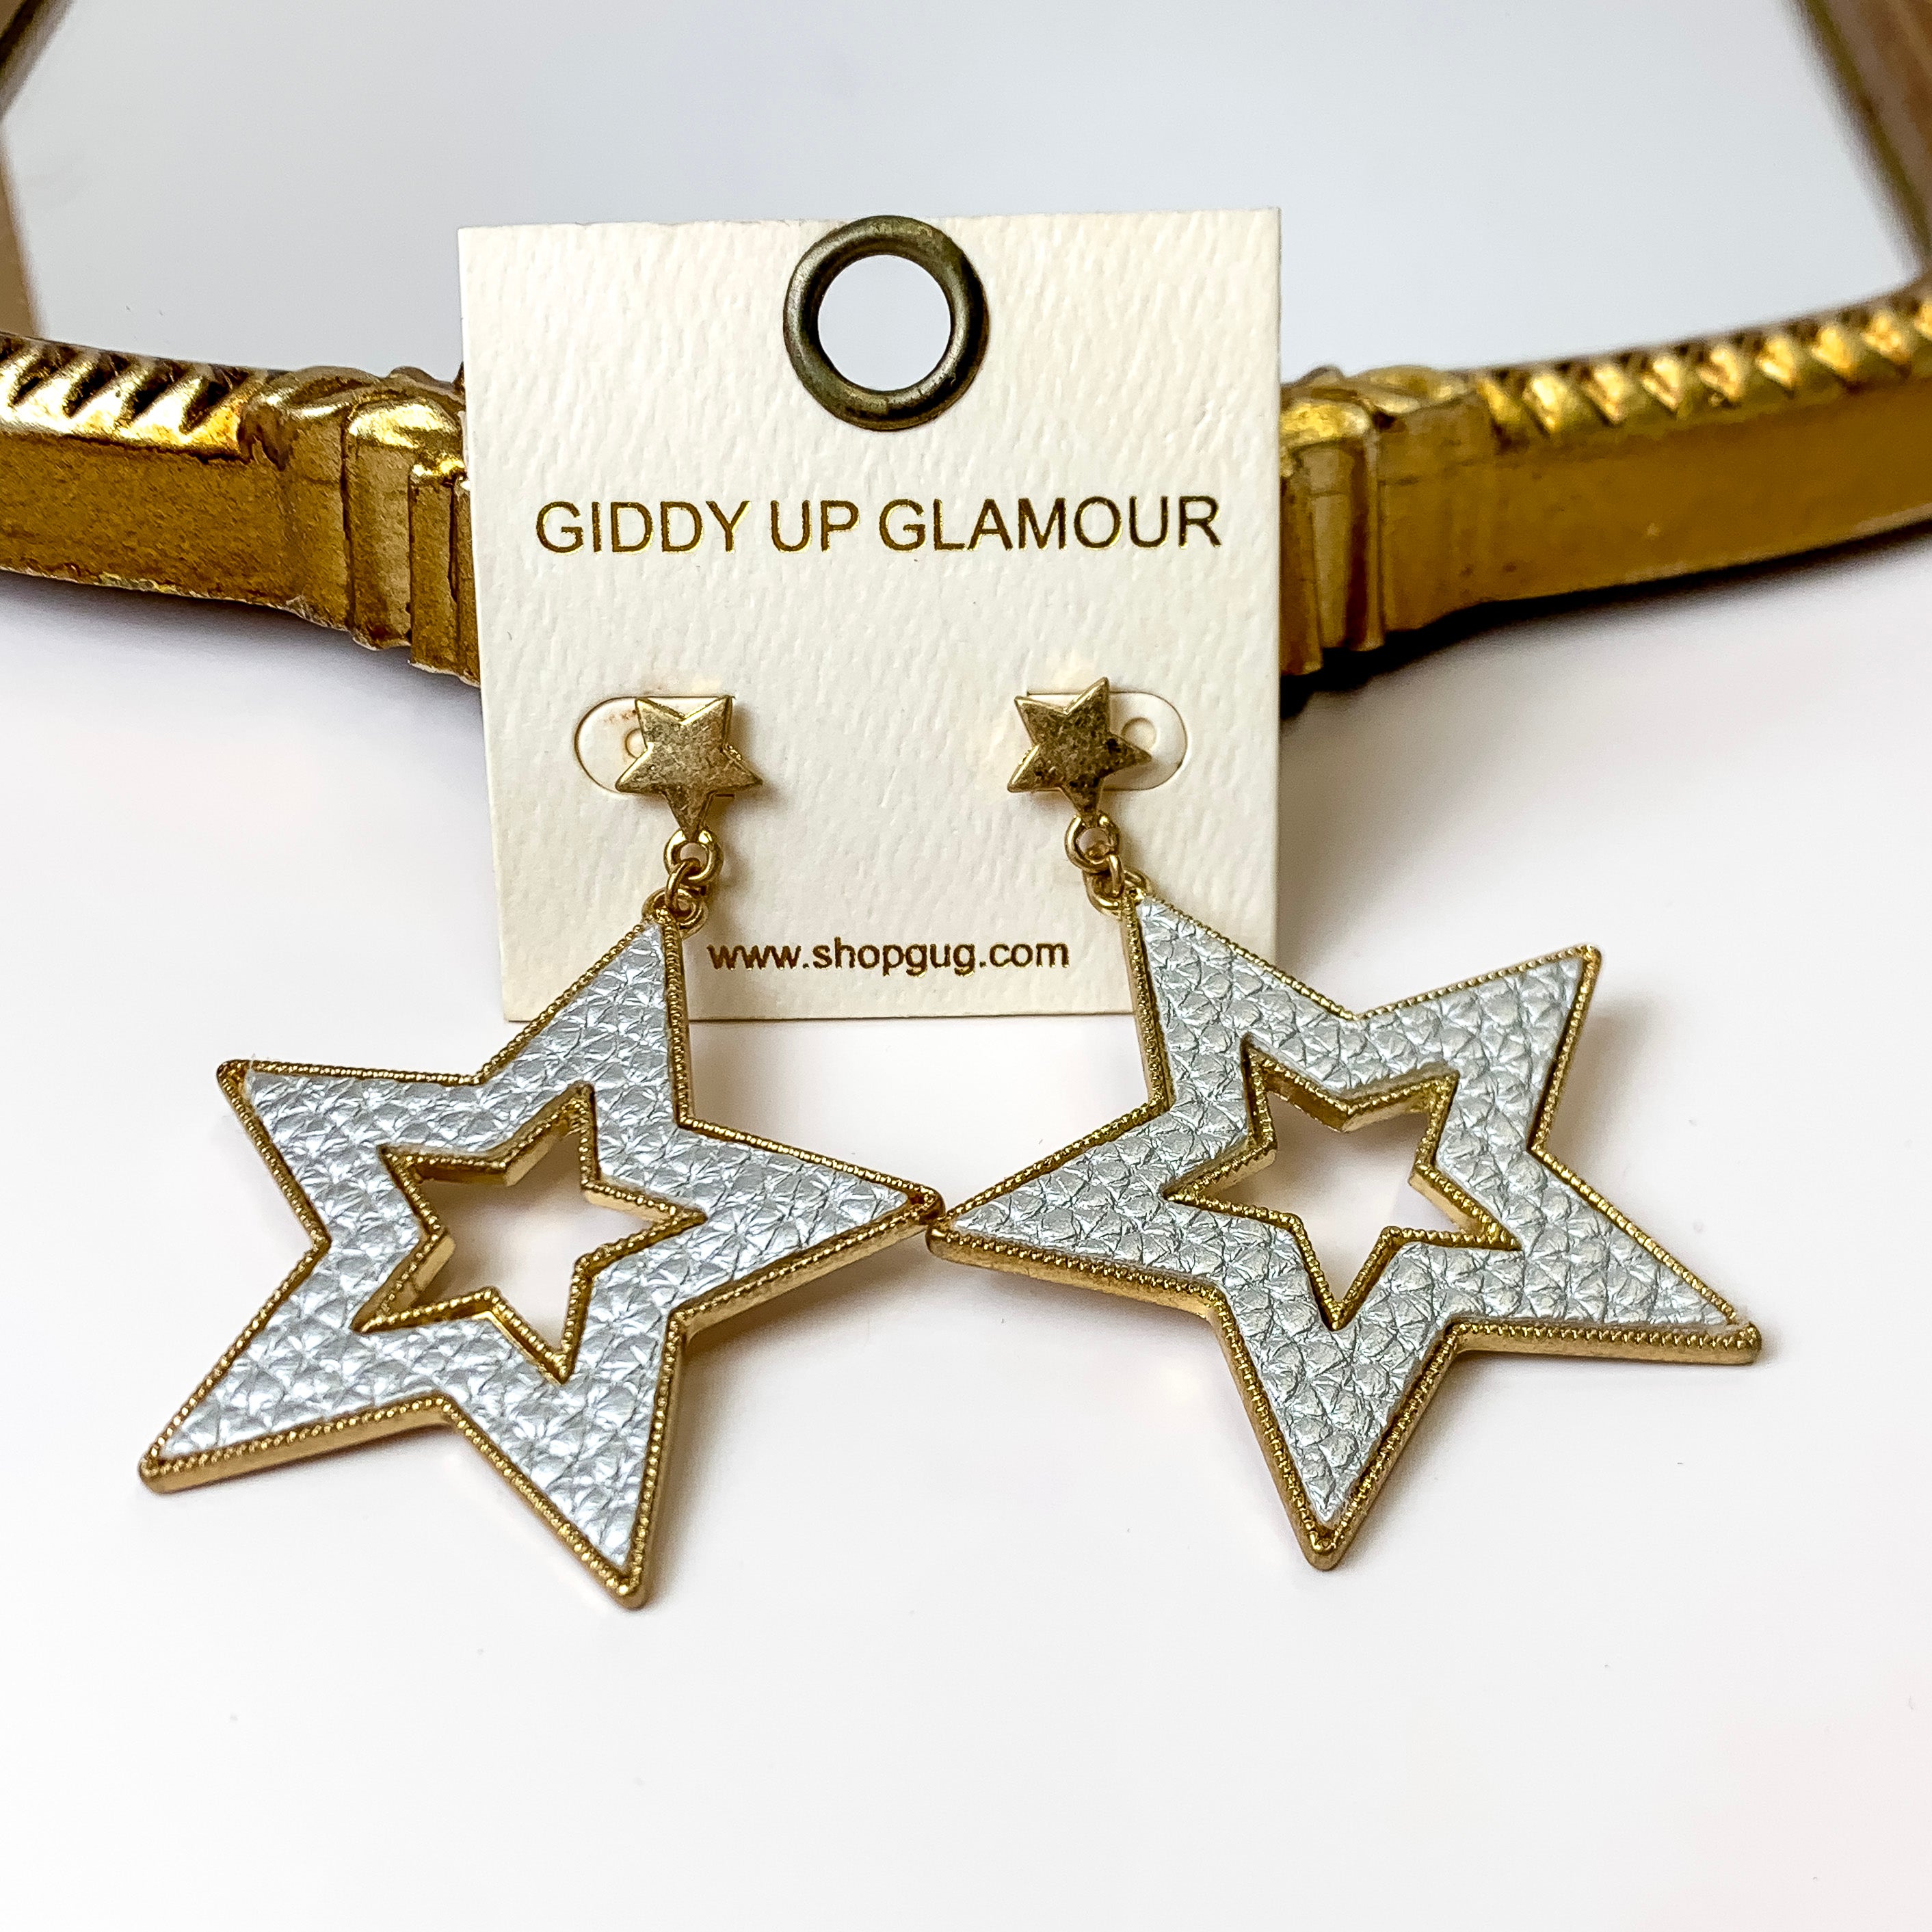 She's a Star Gold Tone Post Dangle Earrings with Leather Star in Silver - Giddy Up Glamour Boutique